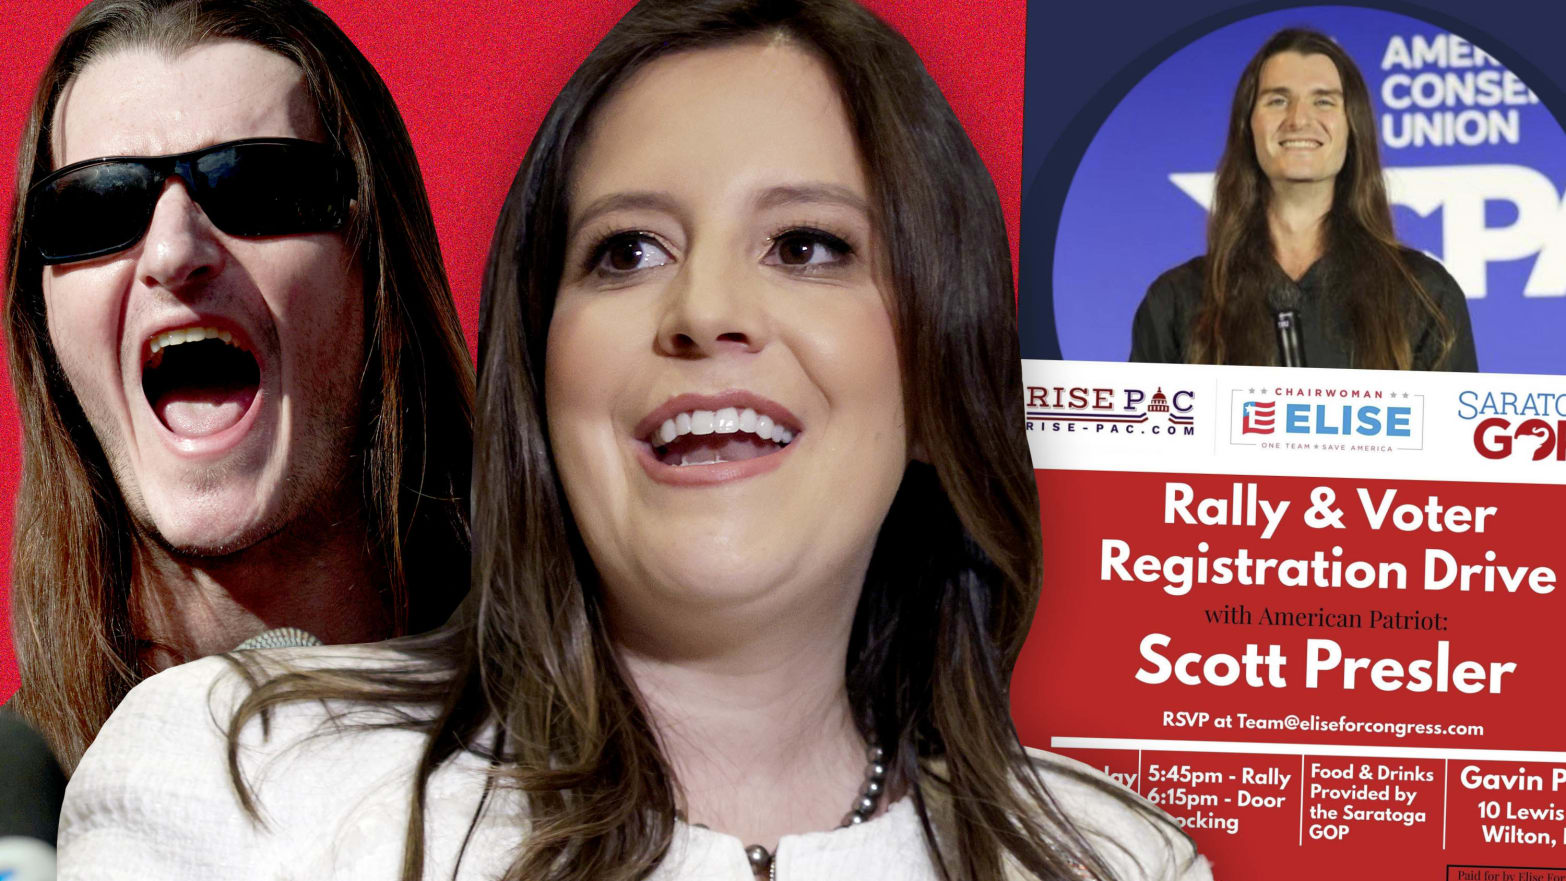 Illustration showing Elise Stefanik and right-wing conspiracy theorist